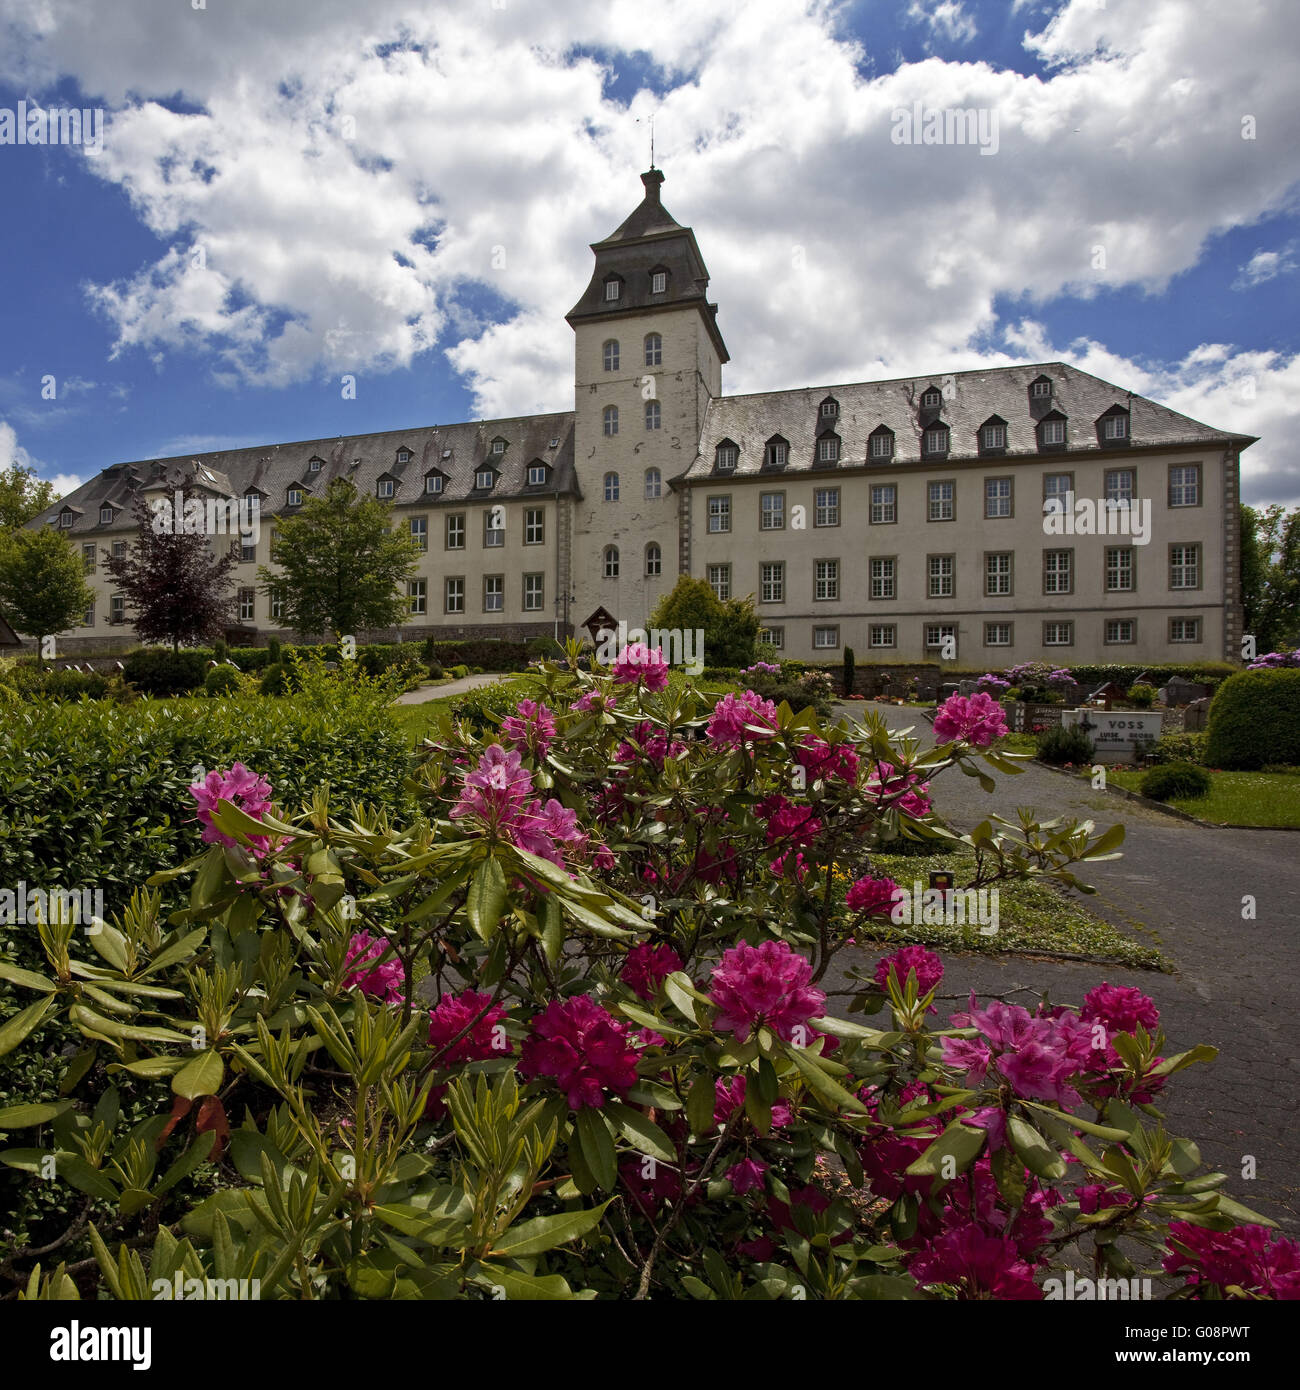 The monastery in the county, Schmallenberg,Germany Stock Photo